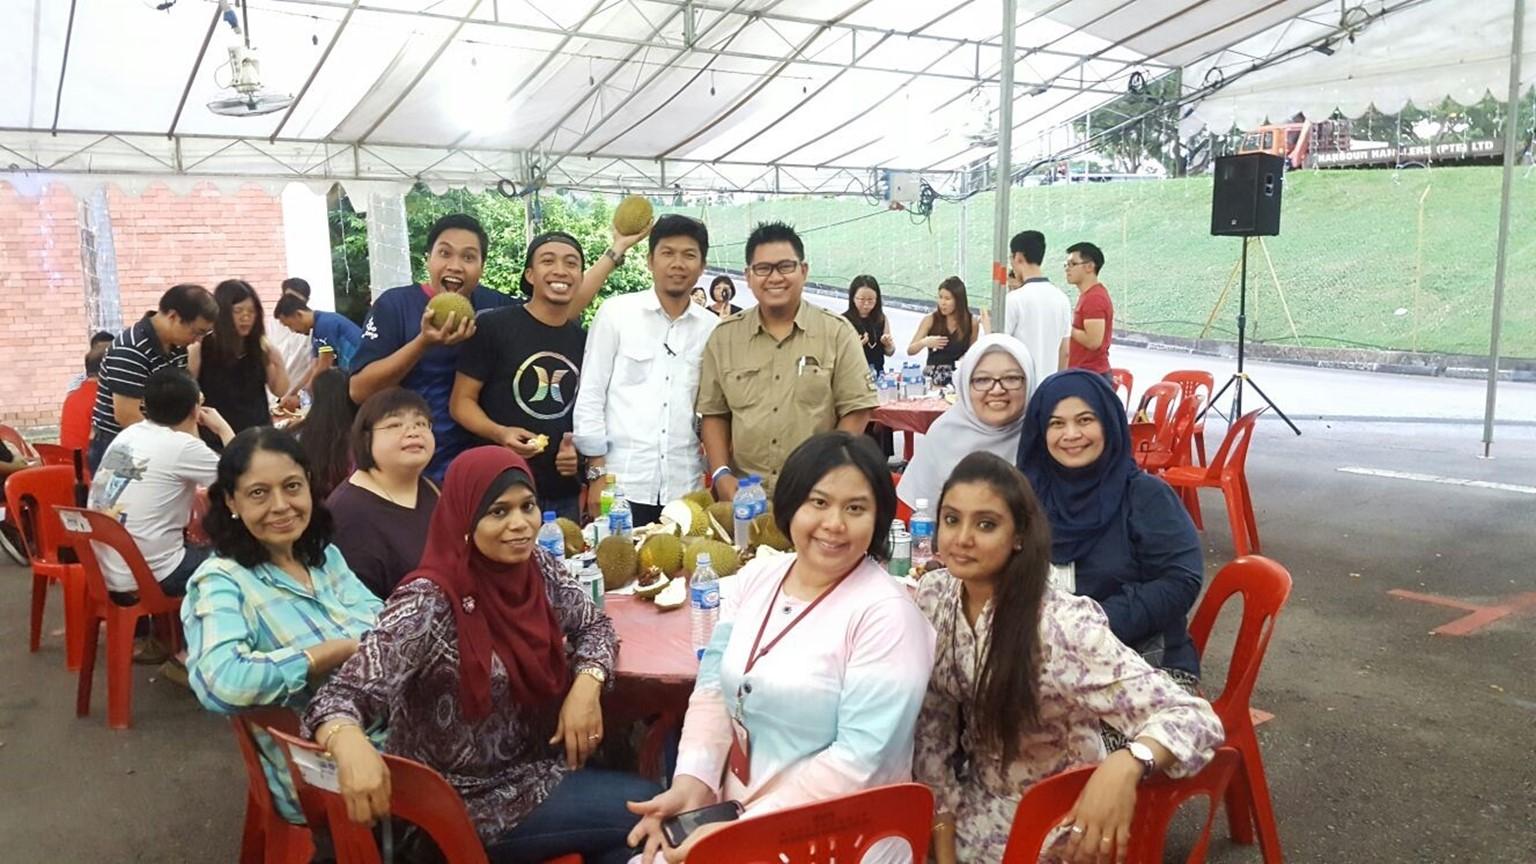 Maizan (in blue attire) and her former colleagues from Meters section enjoying a durian feast together.